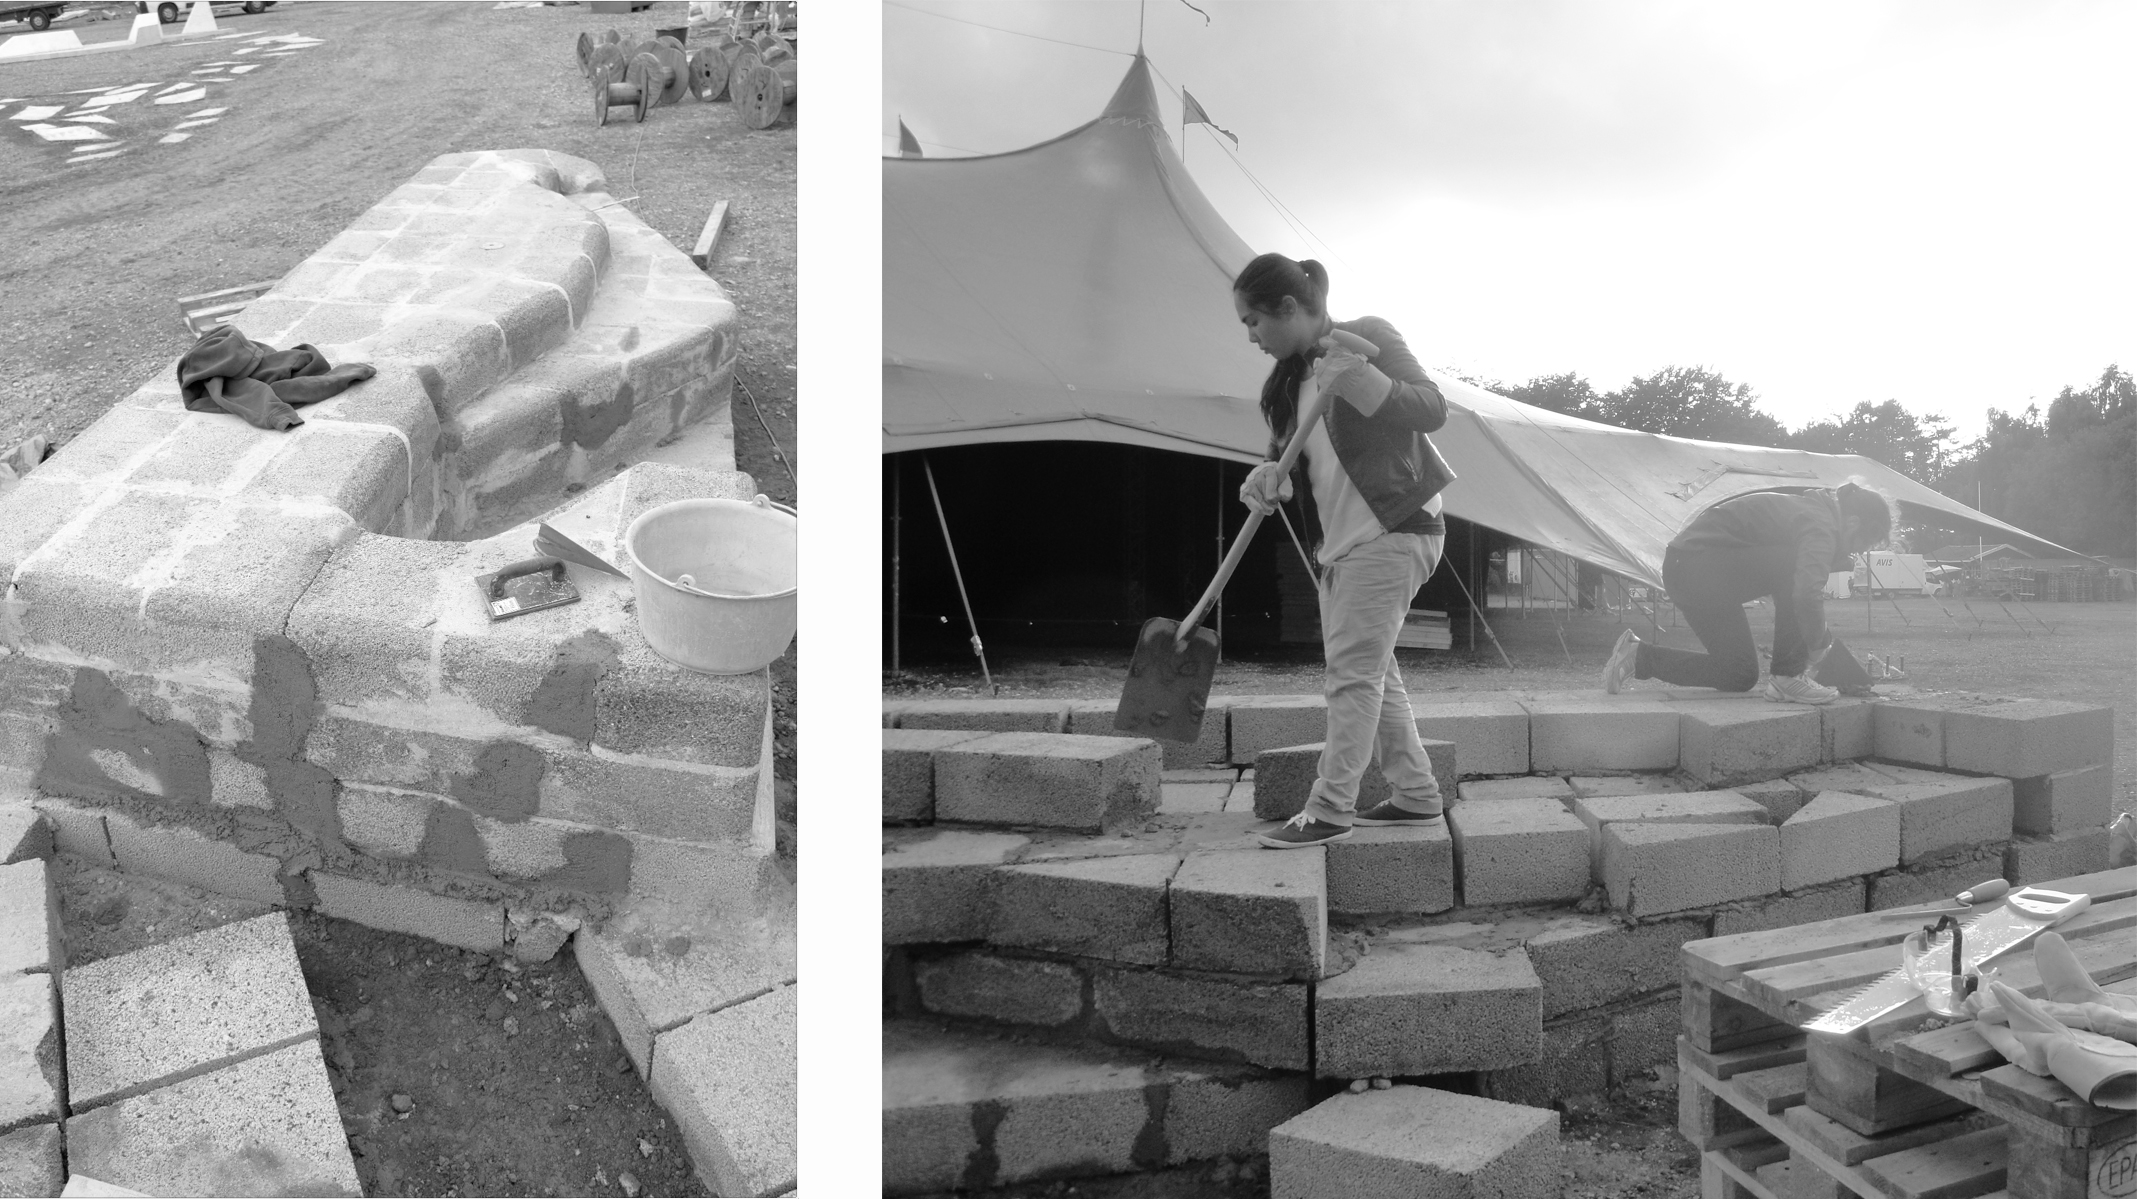 The following pictures are captions of me and my classmates working on our designs for Urban Popup at the Roskilde Festival 2013. Benches, installations, lights and a dancefloor. This picture: Zühranur Çelik & Josefin Norrby